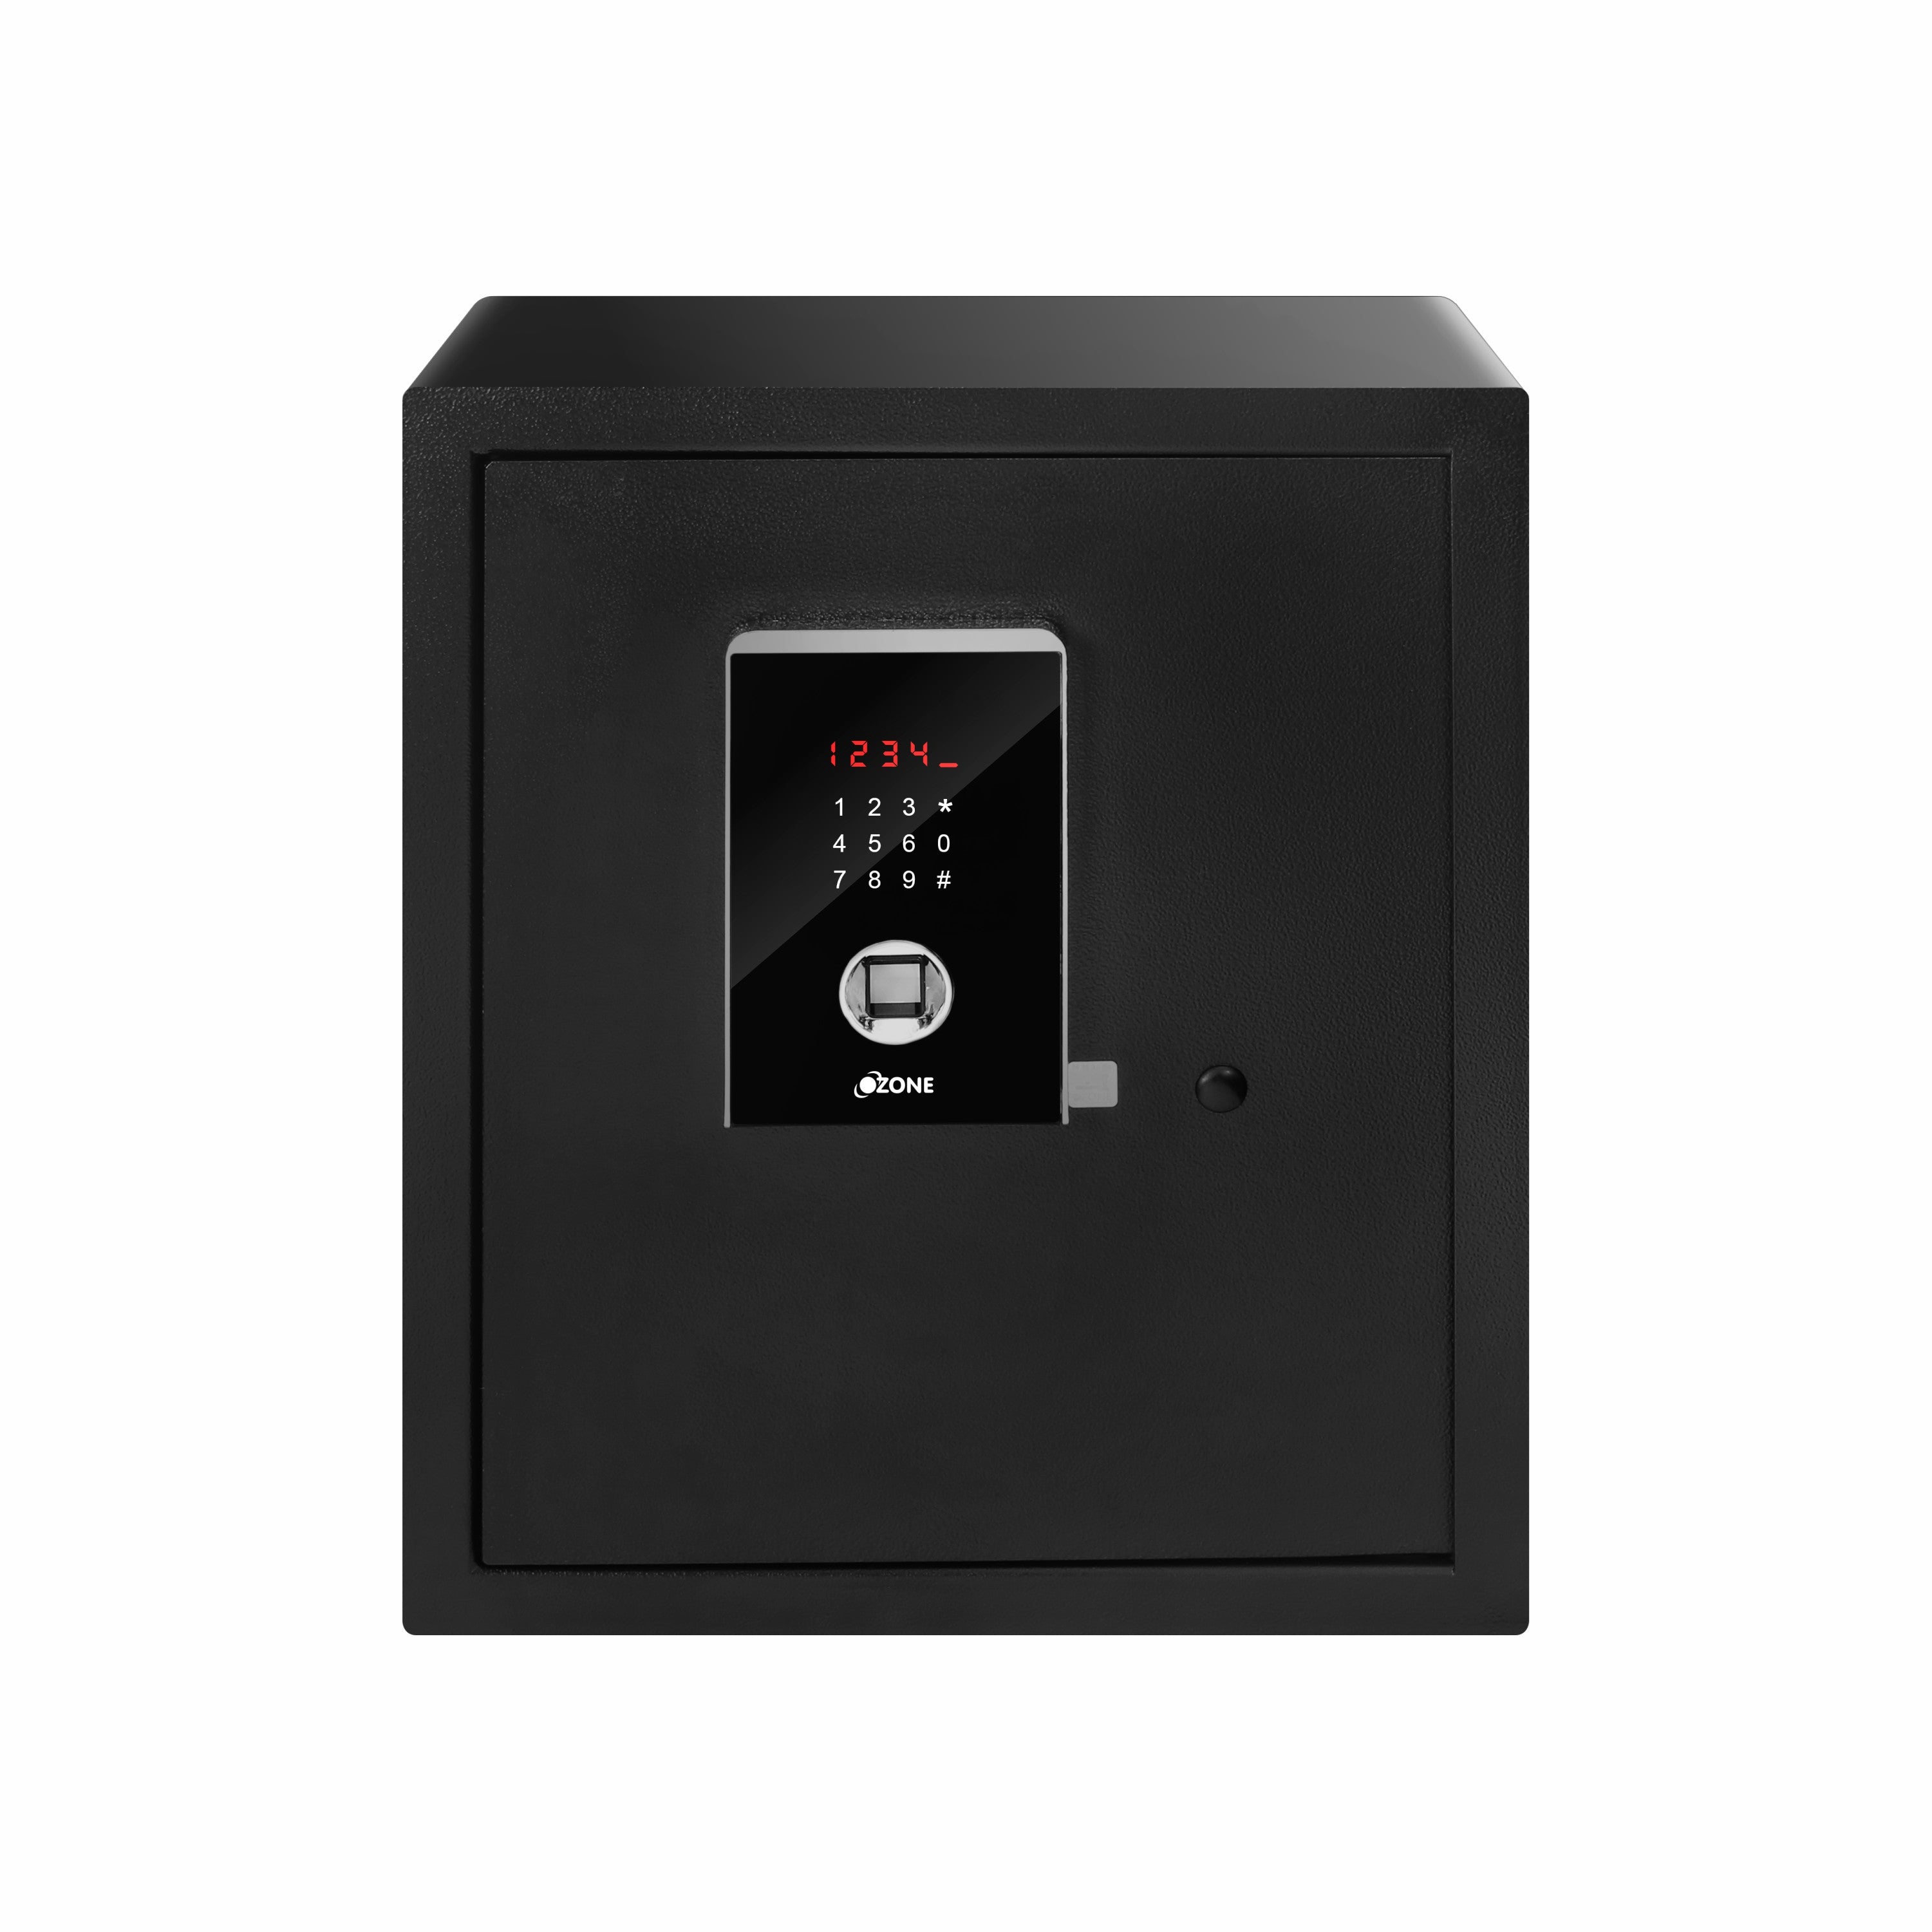 Ozone Biometric Safe for Homes, Offices & Warehouses | 3-way Access | Fingerprint, Password & Emergency Key (40 Ltrs.)